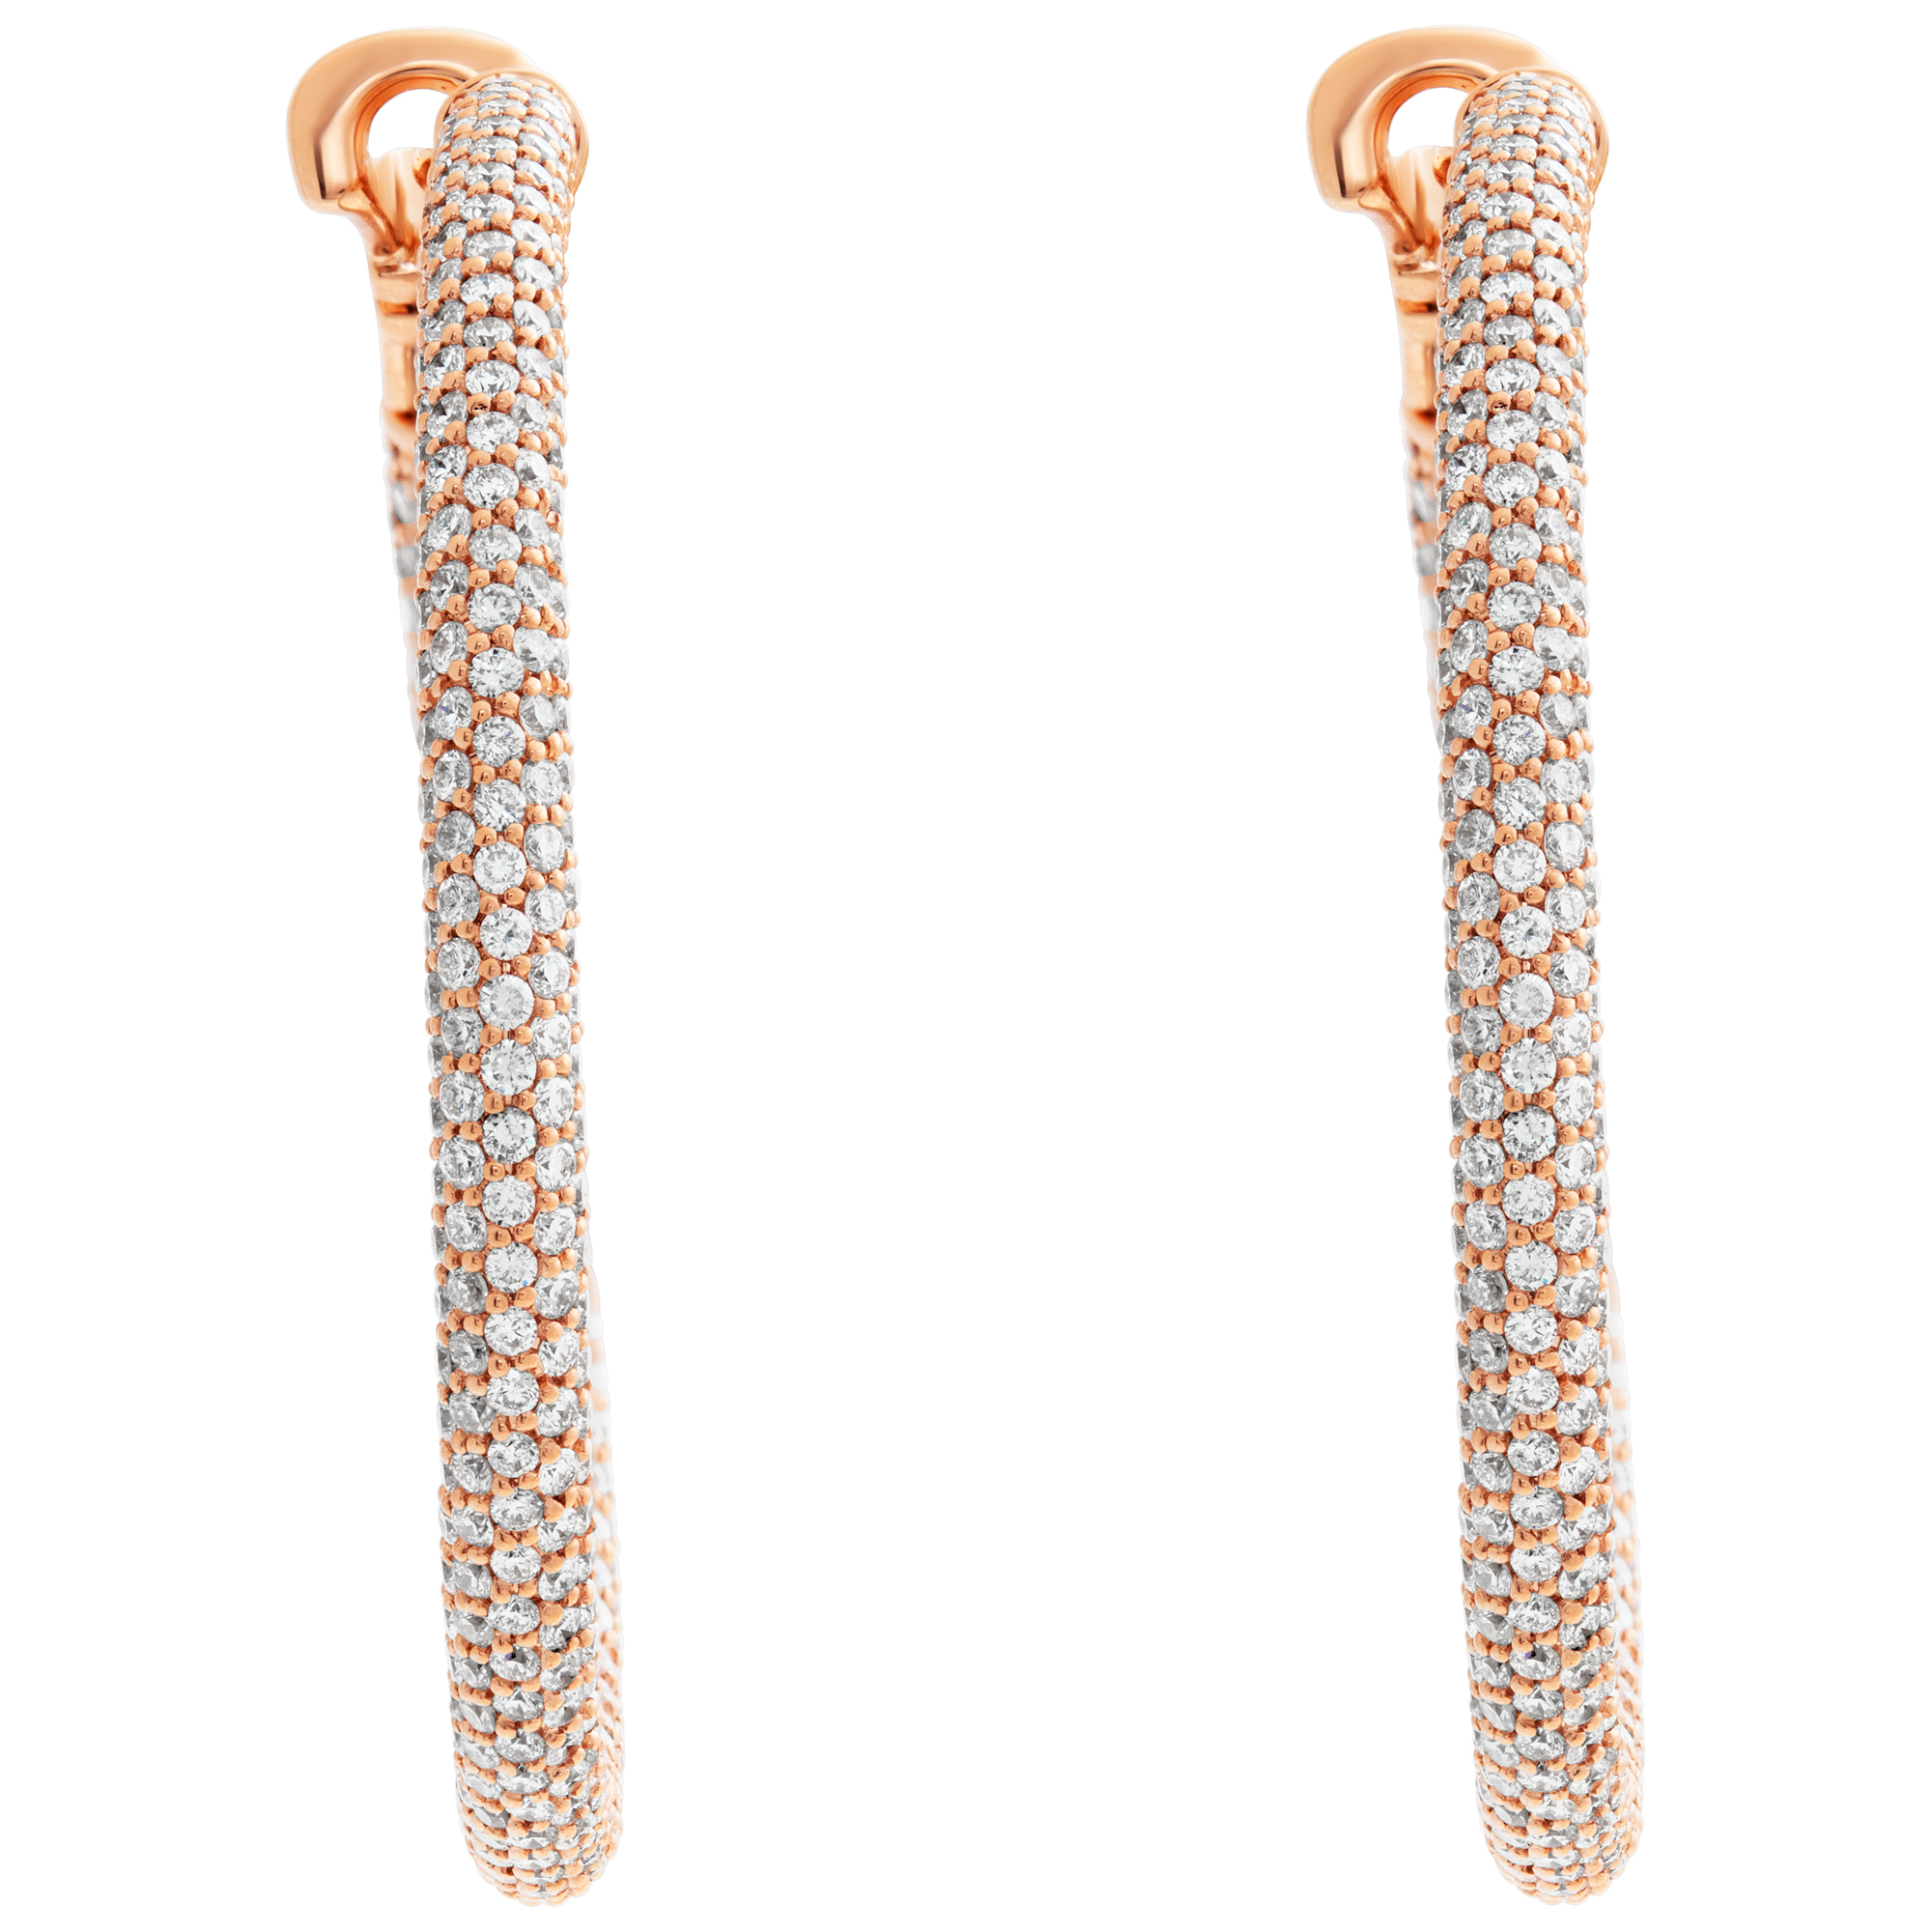 18k rose gold pave hoop earrings with 6.90 carats in round brilliant cut diamonds image 1